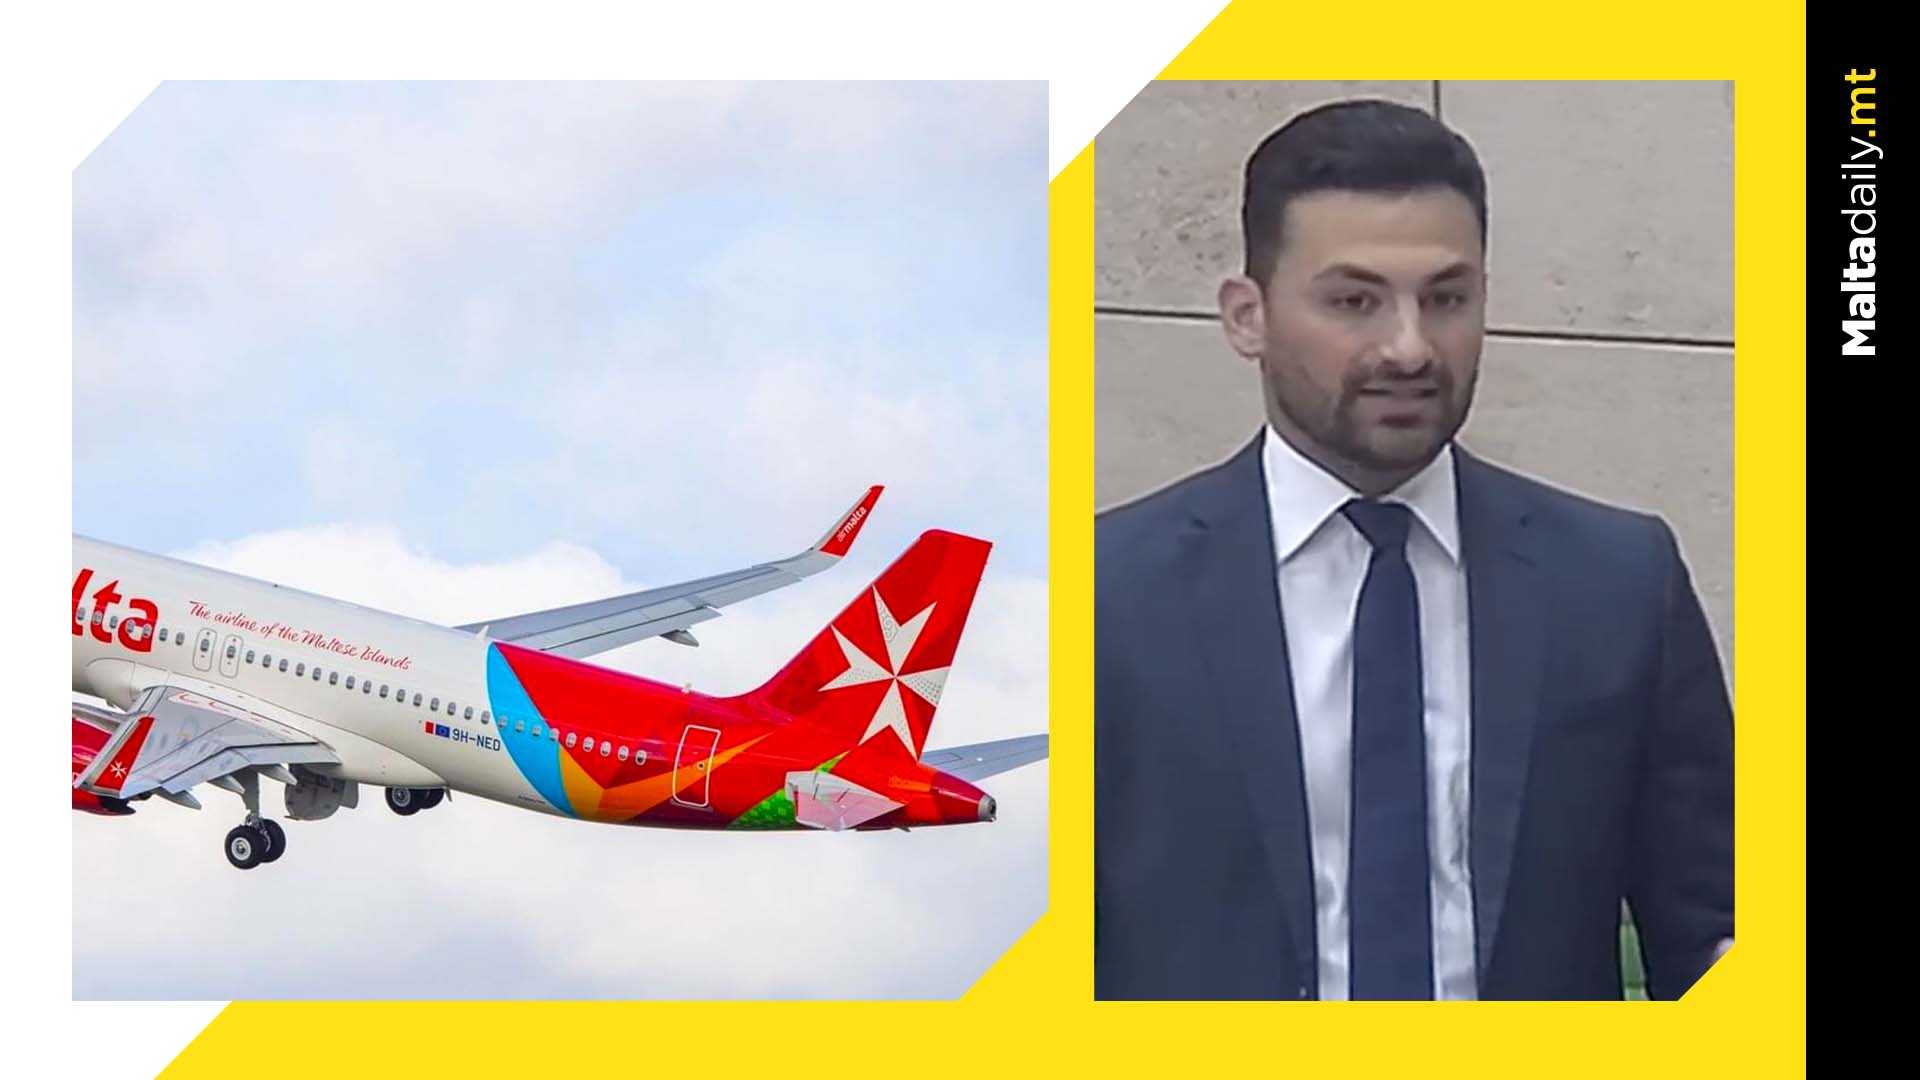 10 Reasons Why Malta Needed A New Airline